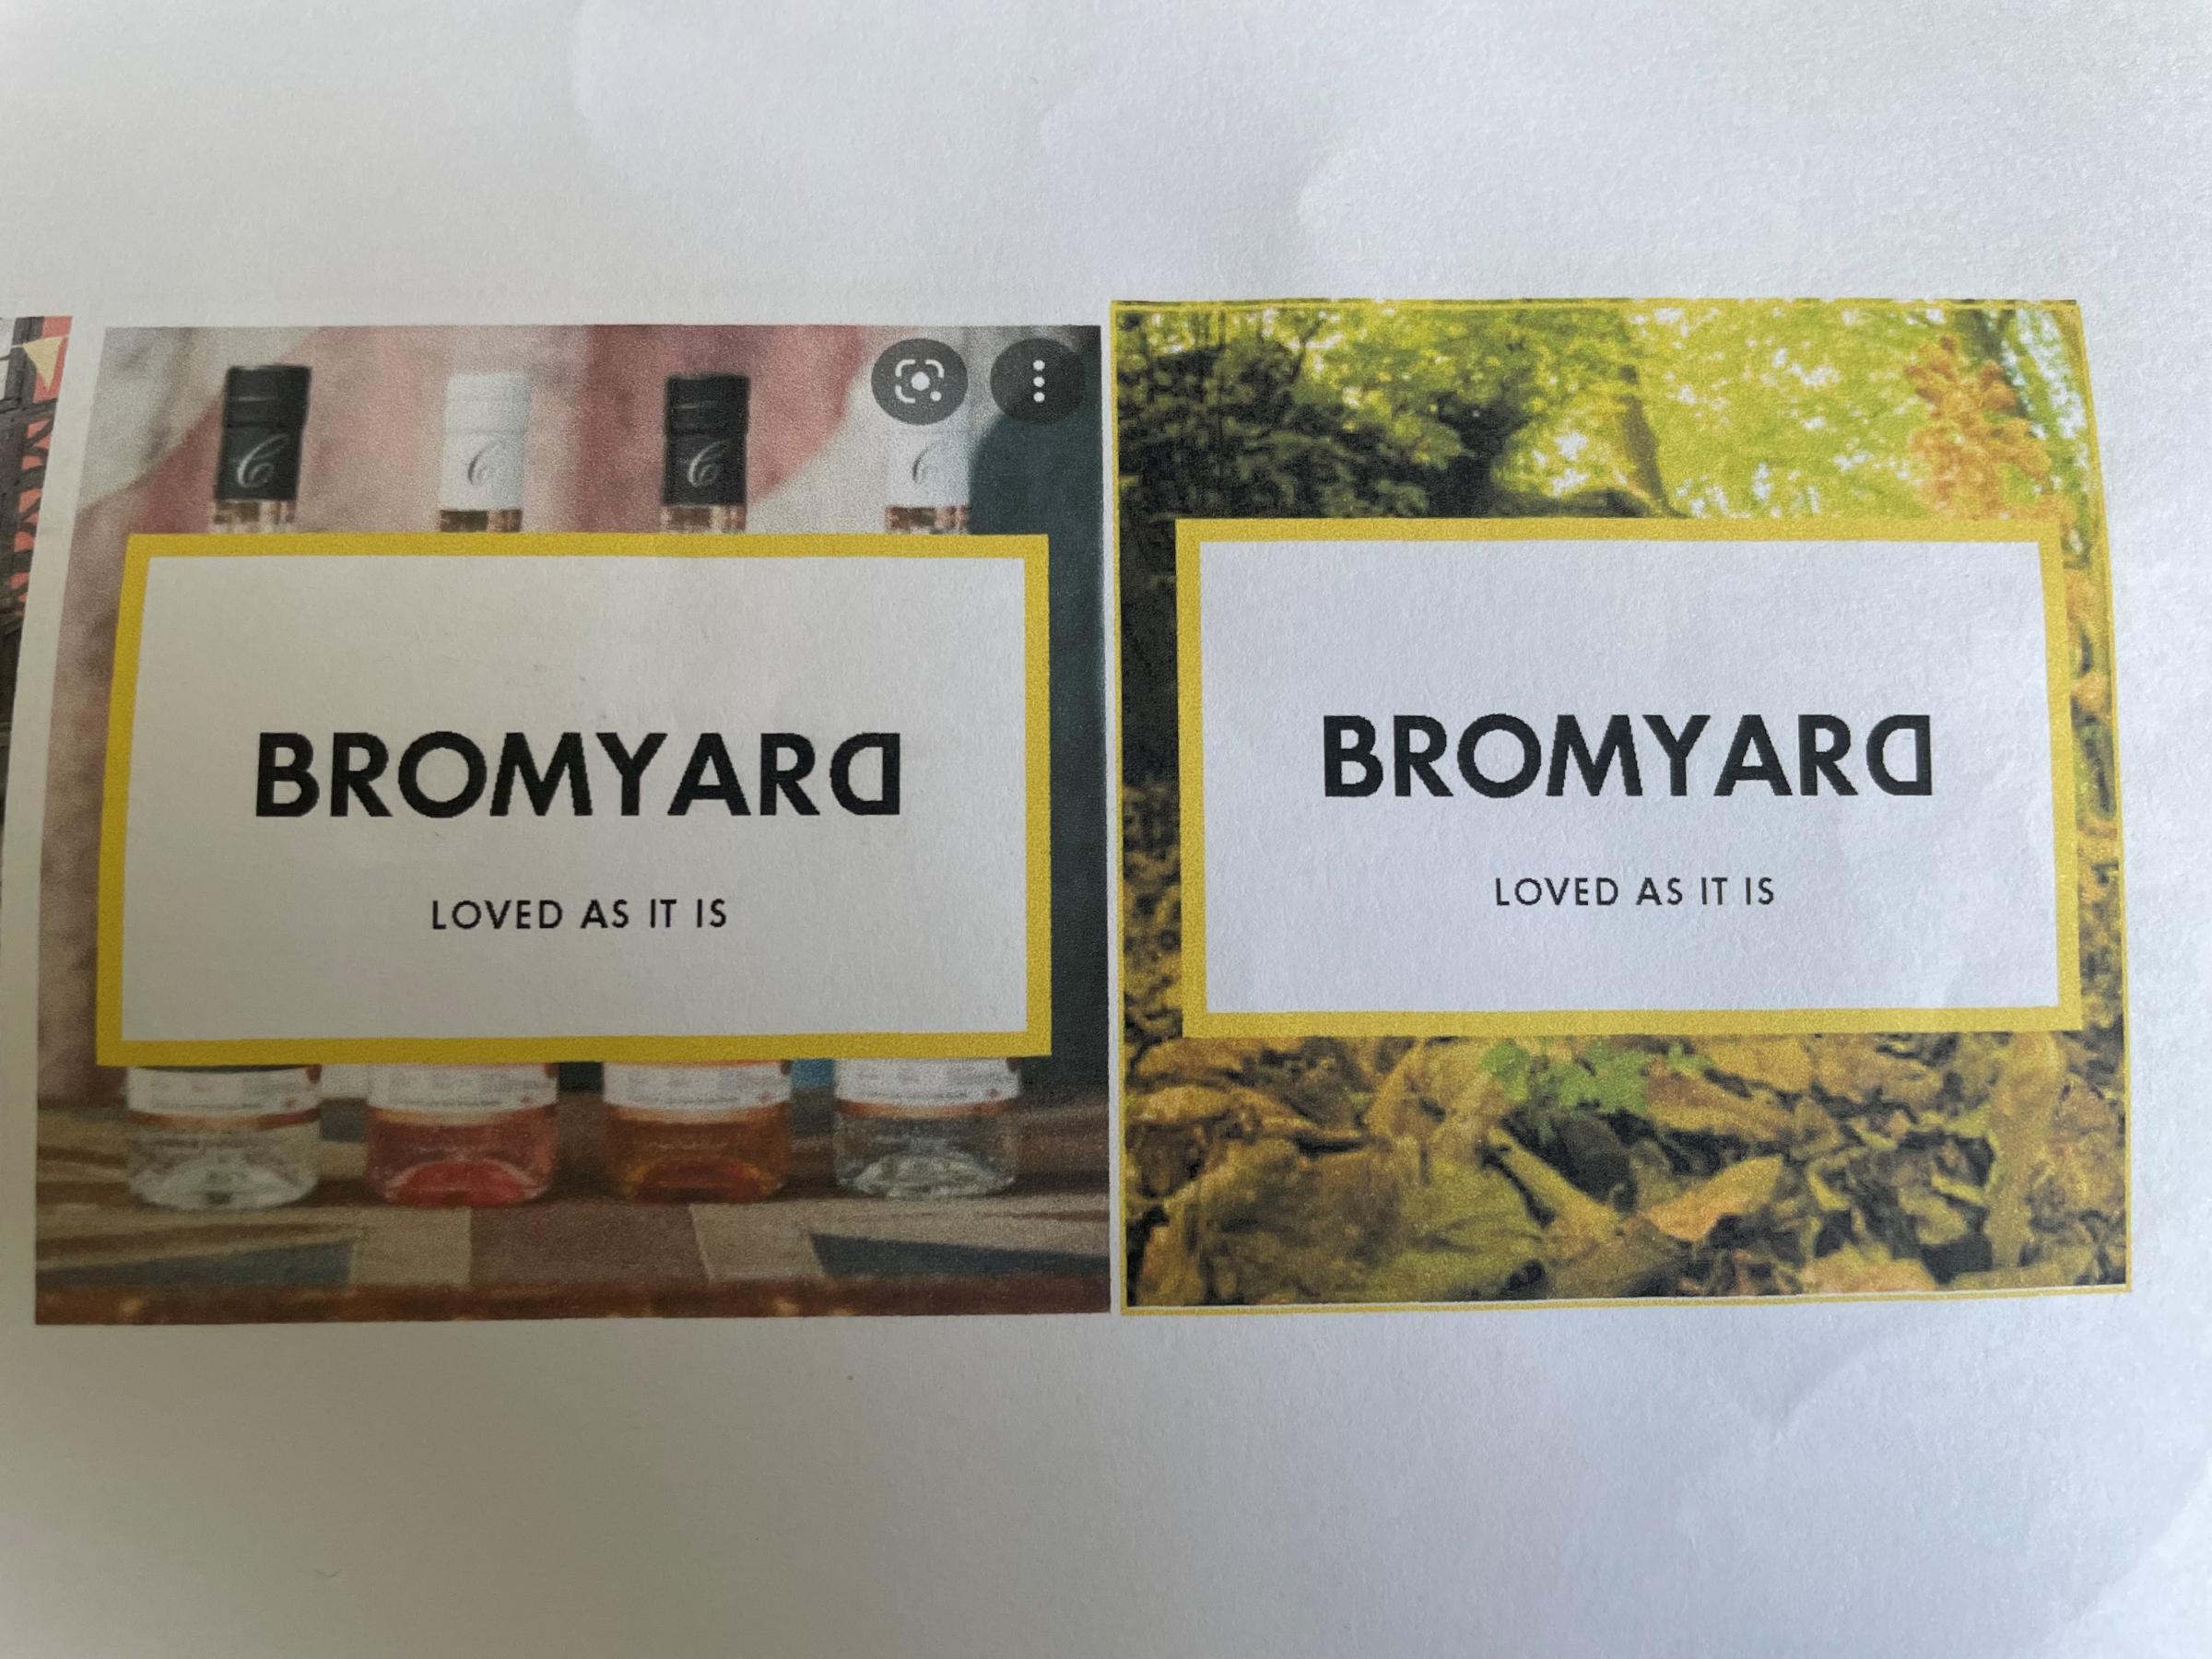 Social media examples of the new Bromyard branding. Picture: K4 Architects/Lucy Grafham/Nifty Marketing